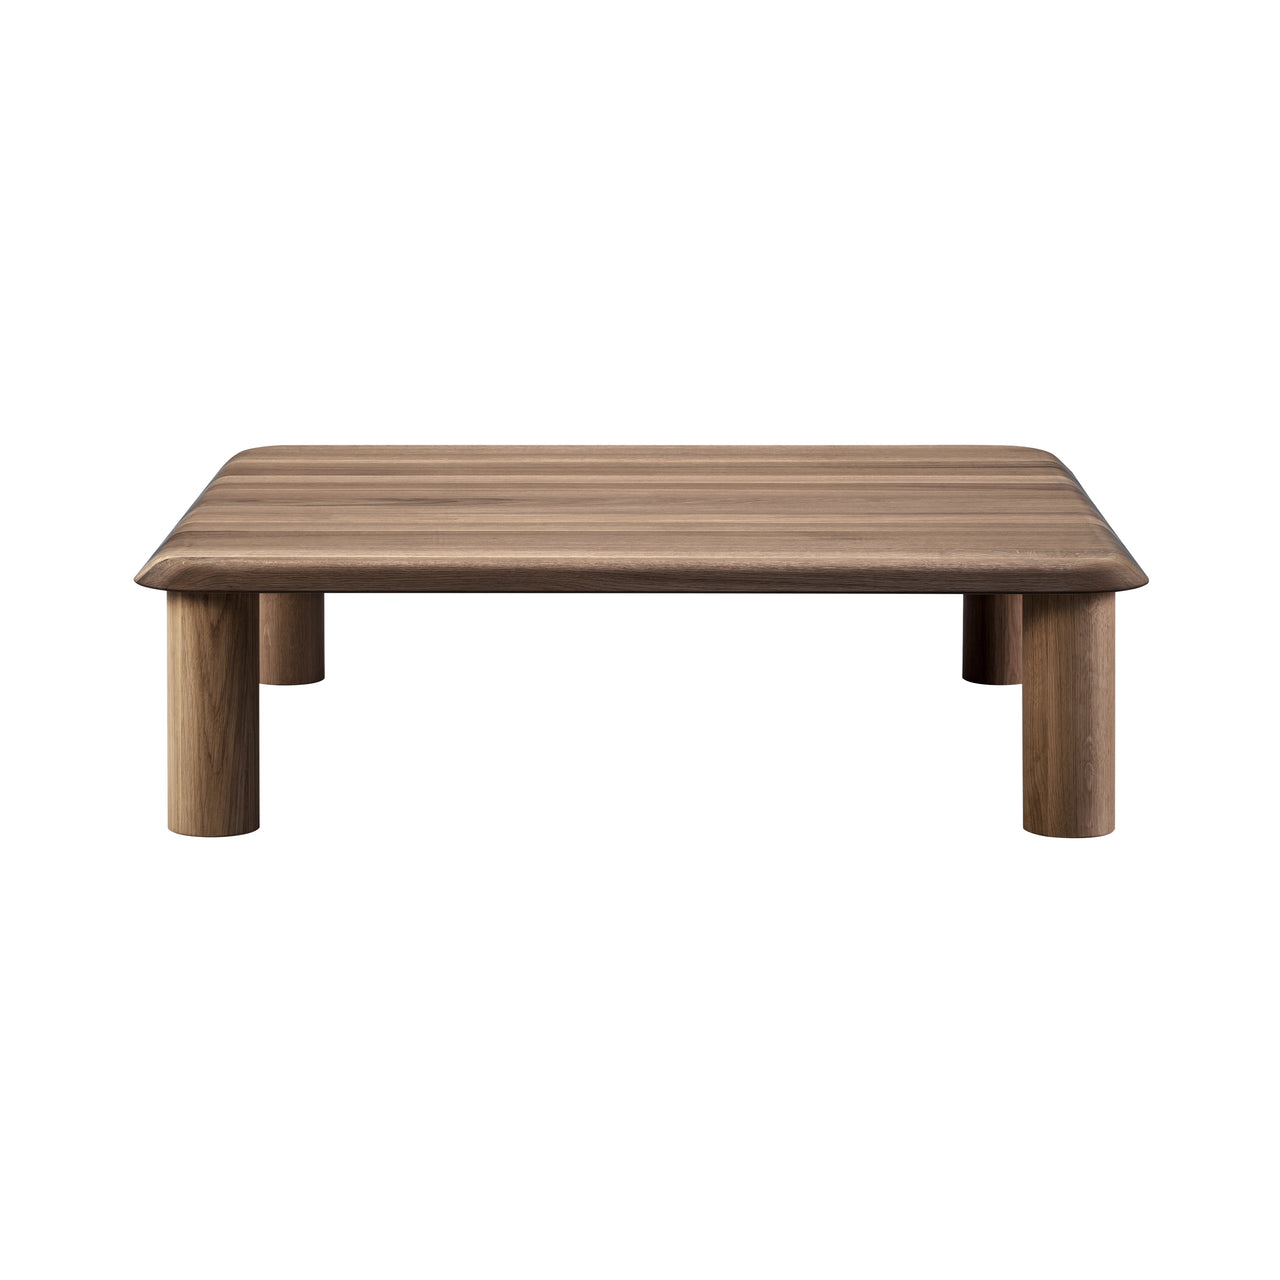 Islets Coffee Table: Smoked Oiled Oak